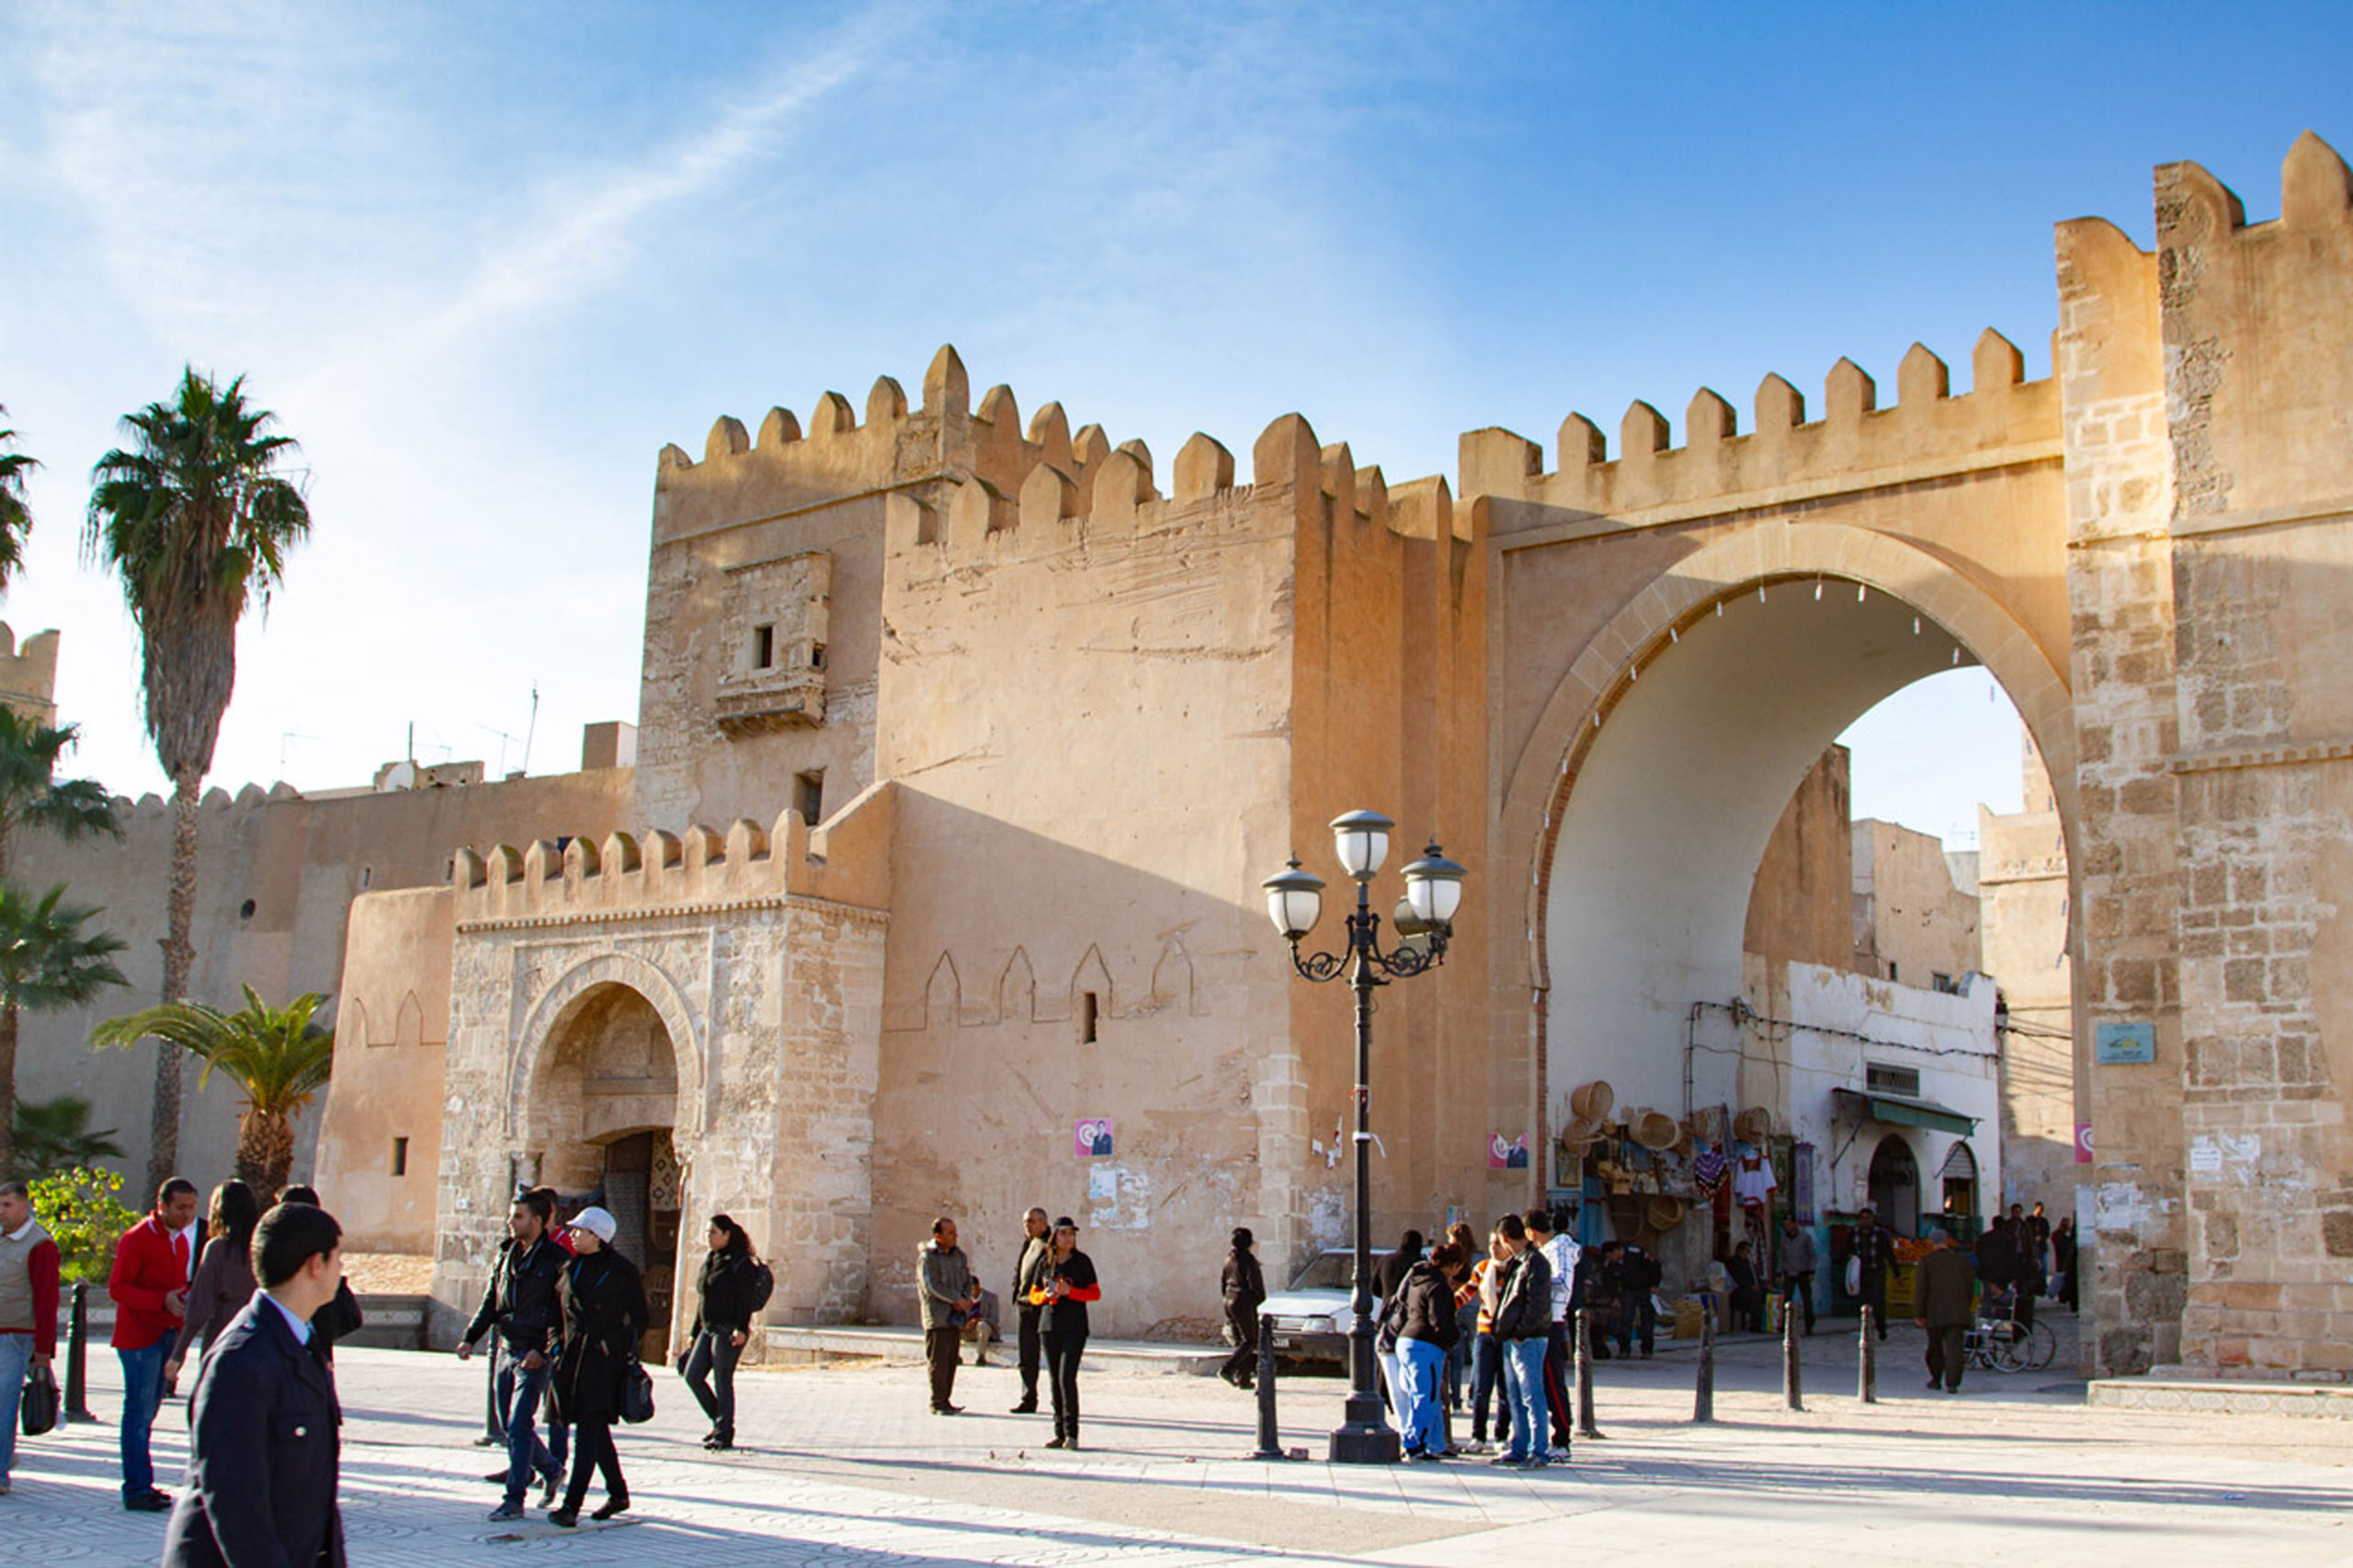 The Sousse gate, ornate and crenelated, is a must-see in Tunisia.